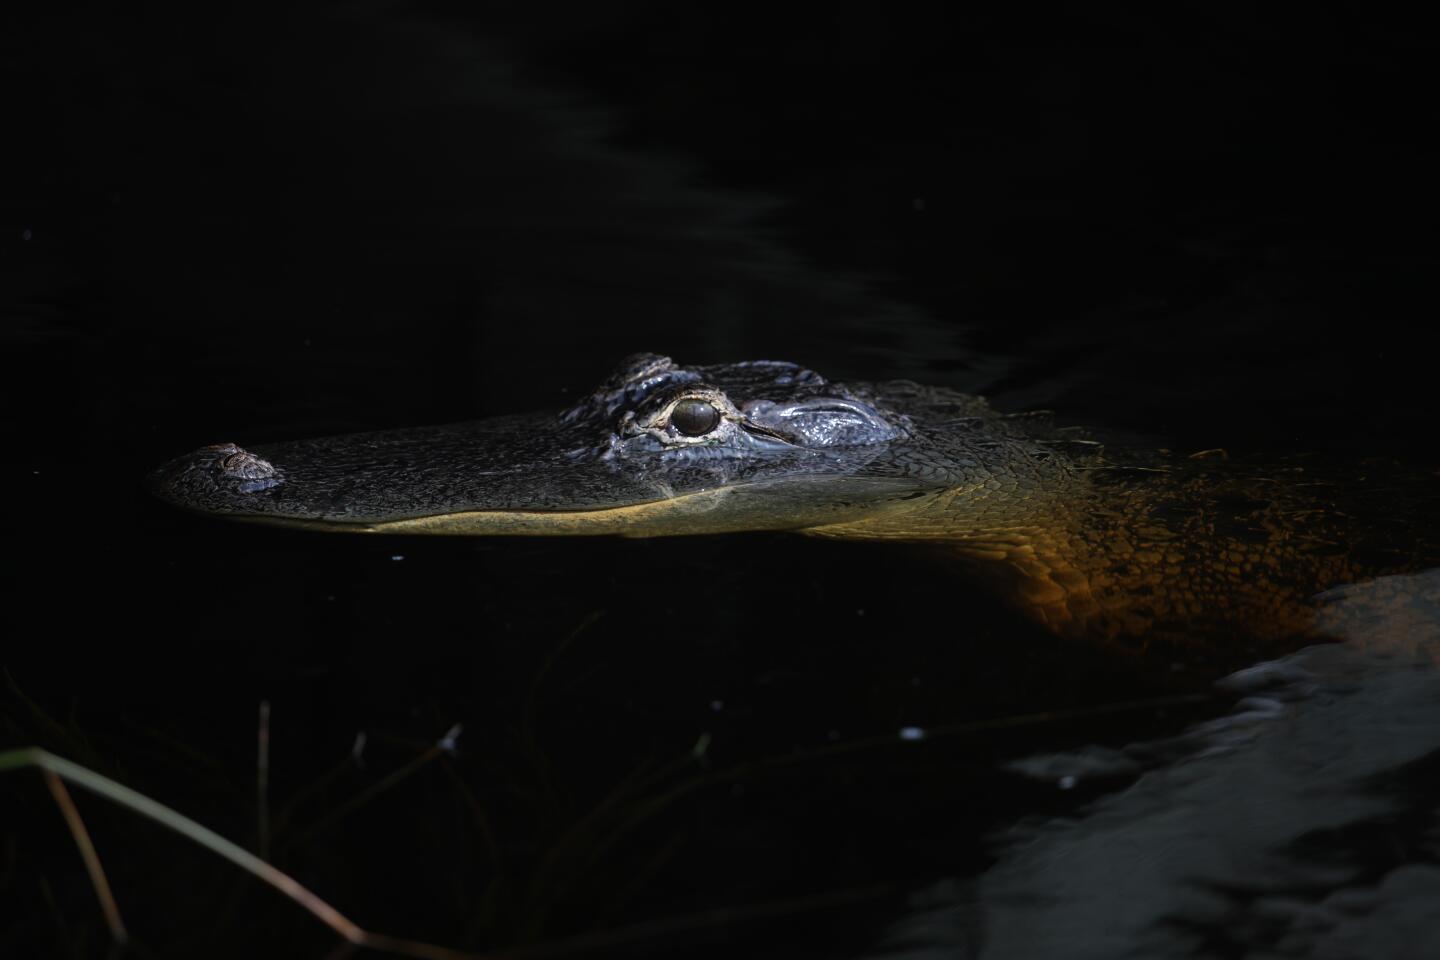 An alligator in the Everglades at night